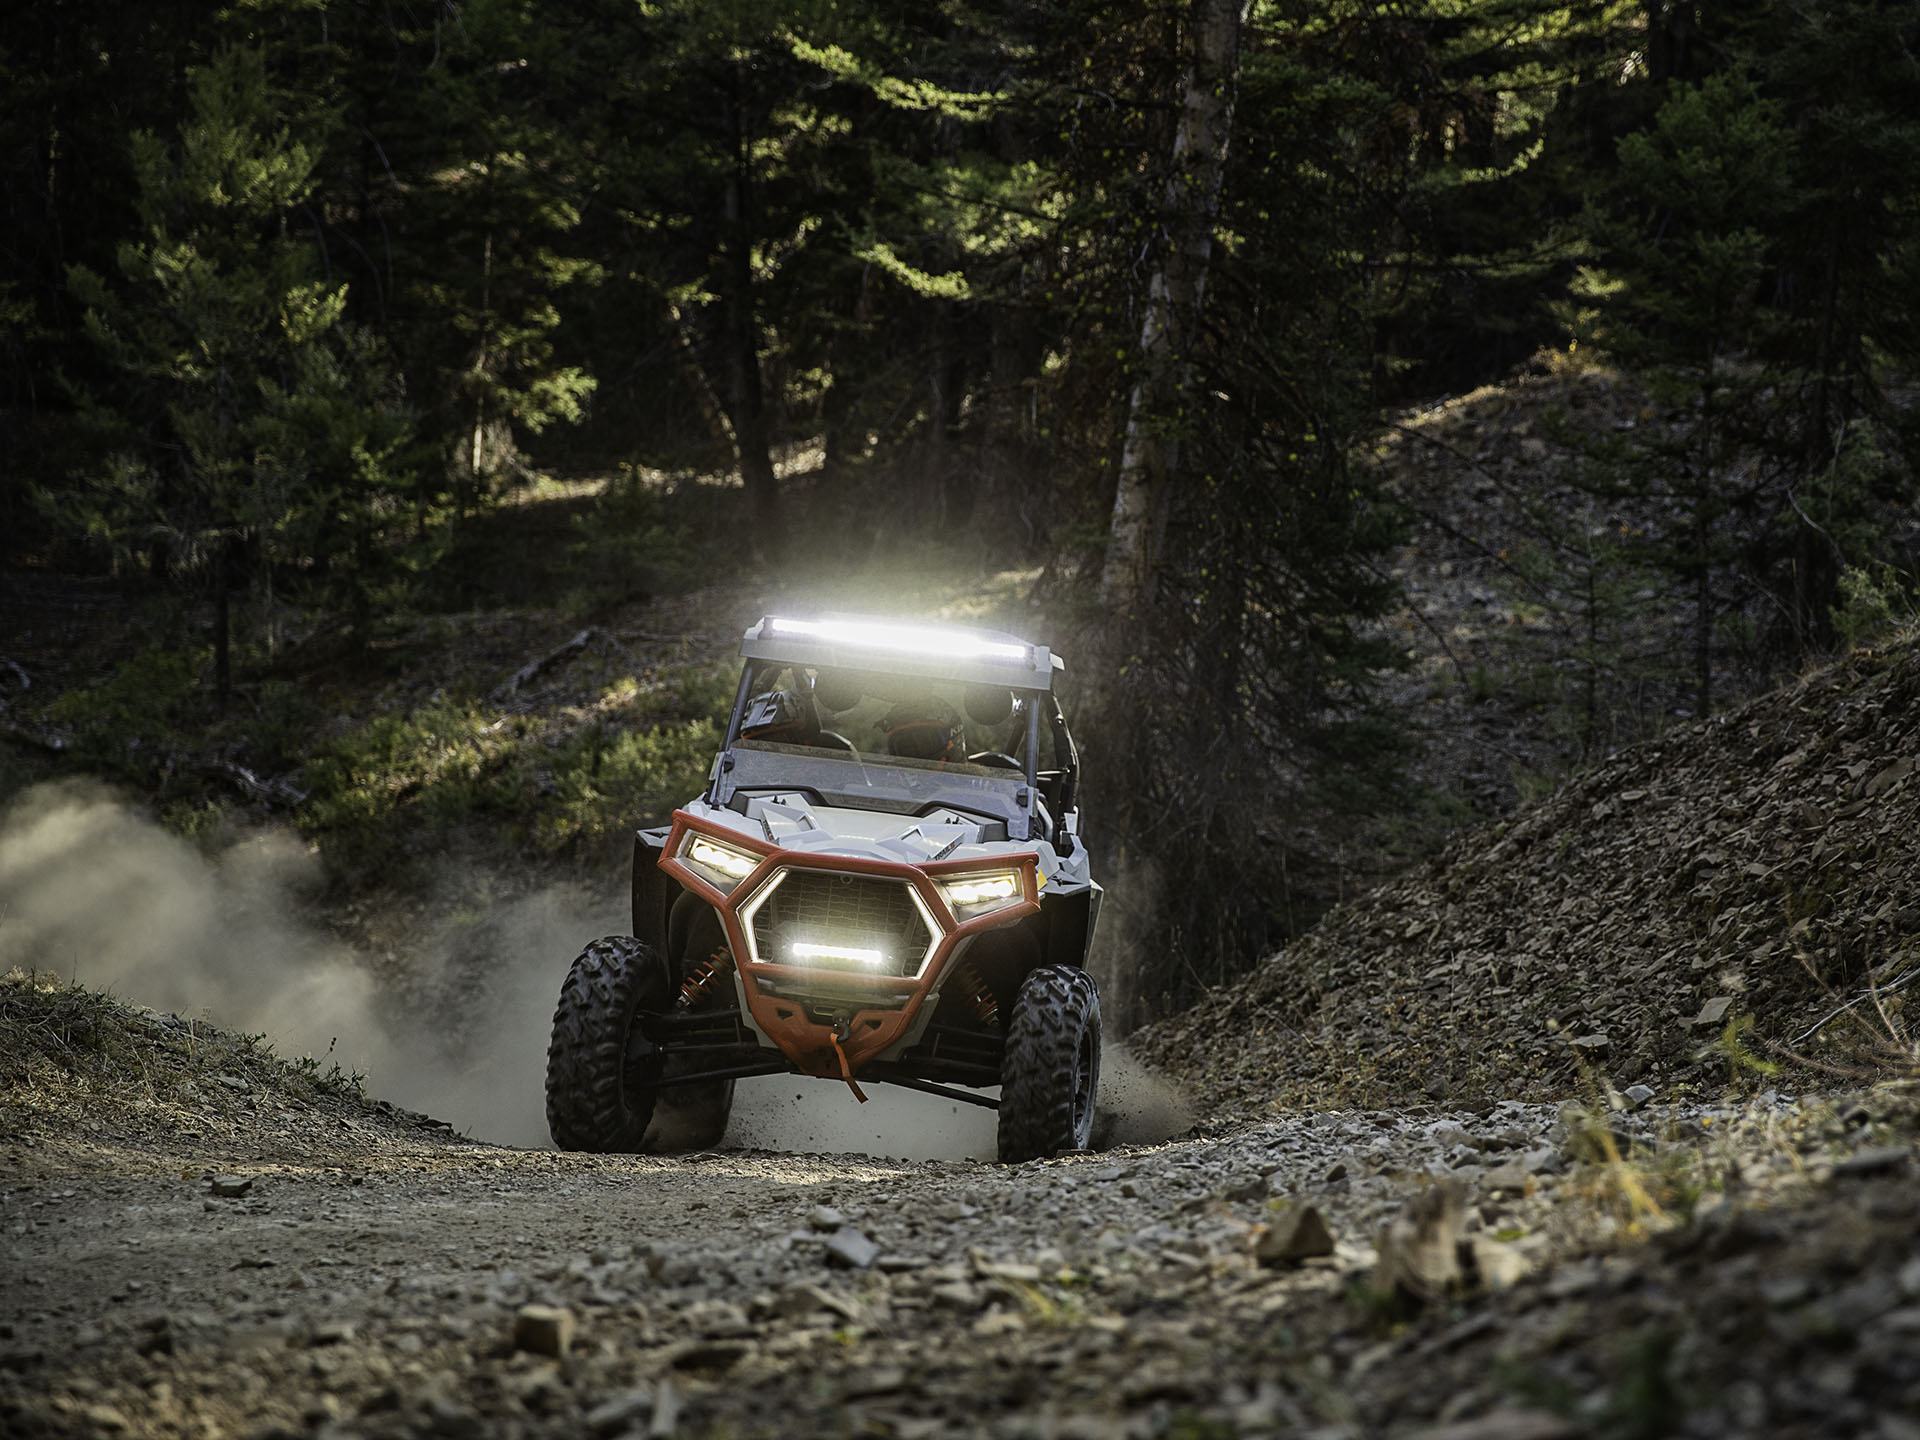 2023 Polaris RZR Trail S 1000 Ultimate in Three Lakes, Wisconsin - Photo 9